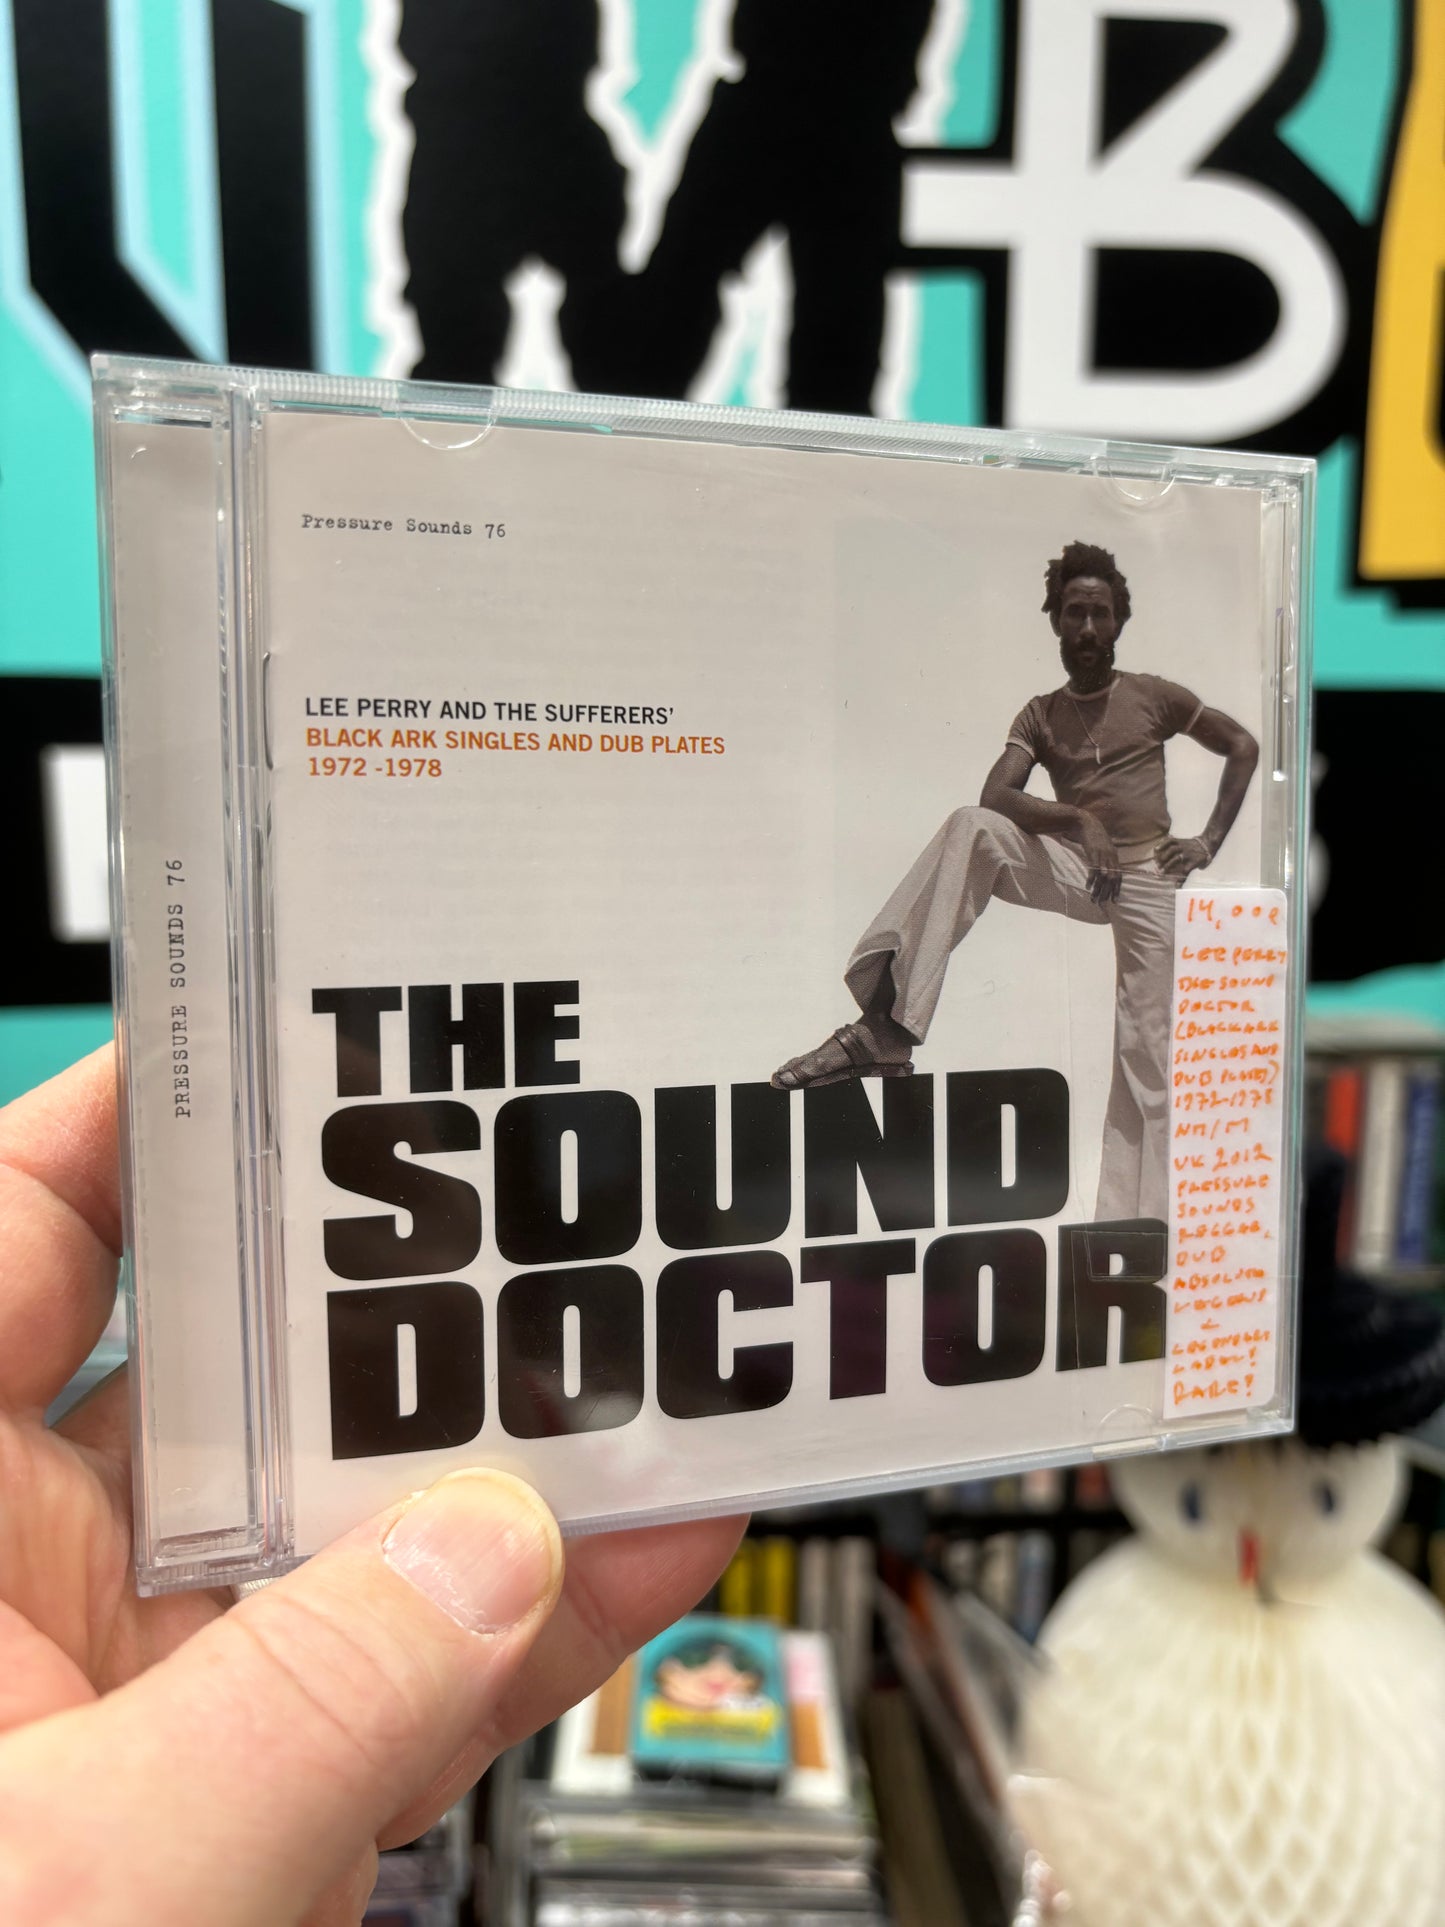 Lee Perry: The Sound Doctor (Black Ark Singles And Dub Plates 1972-1978), CD, UK 2012